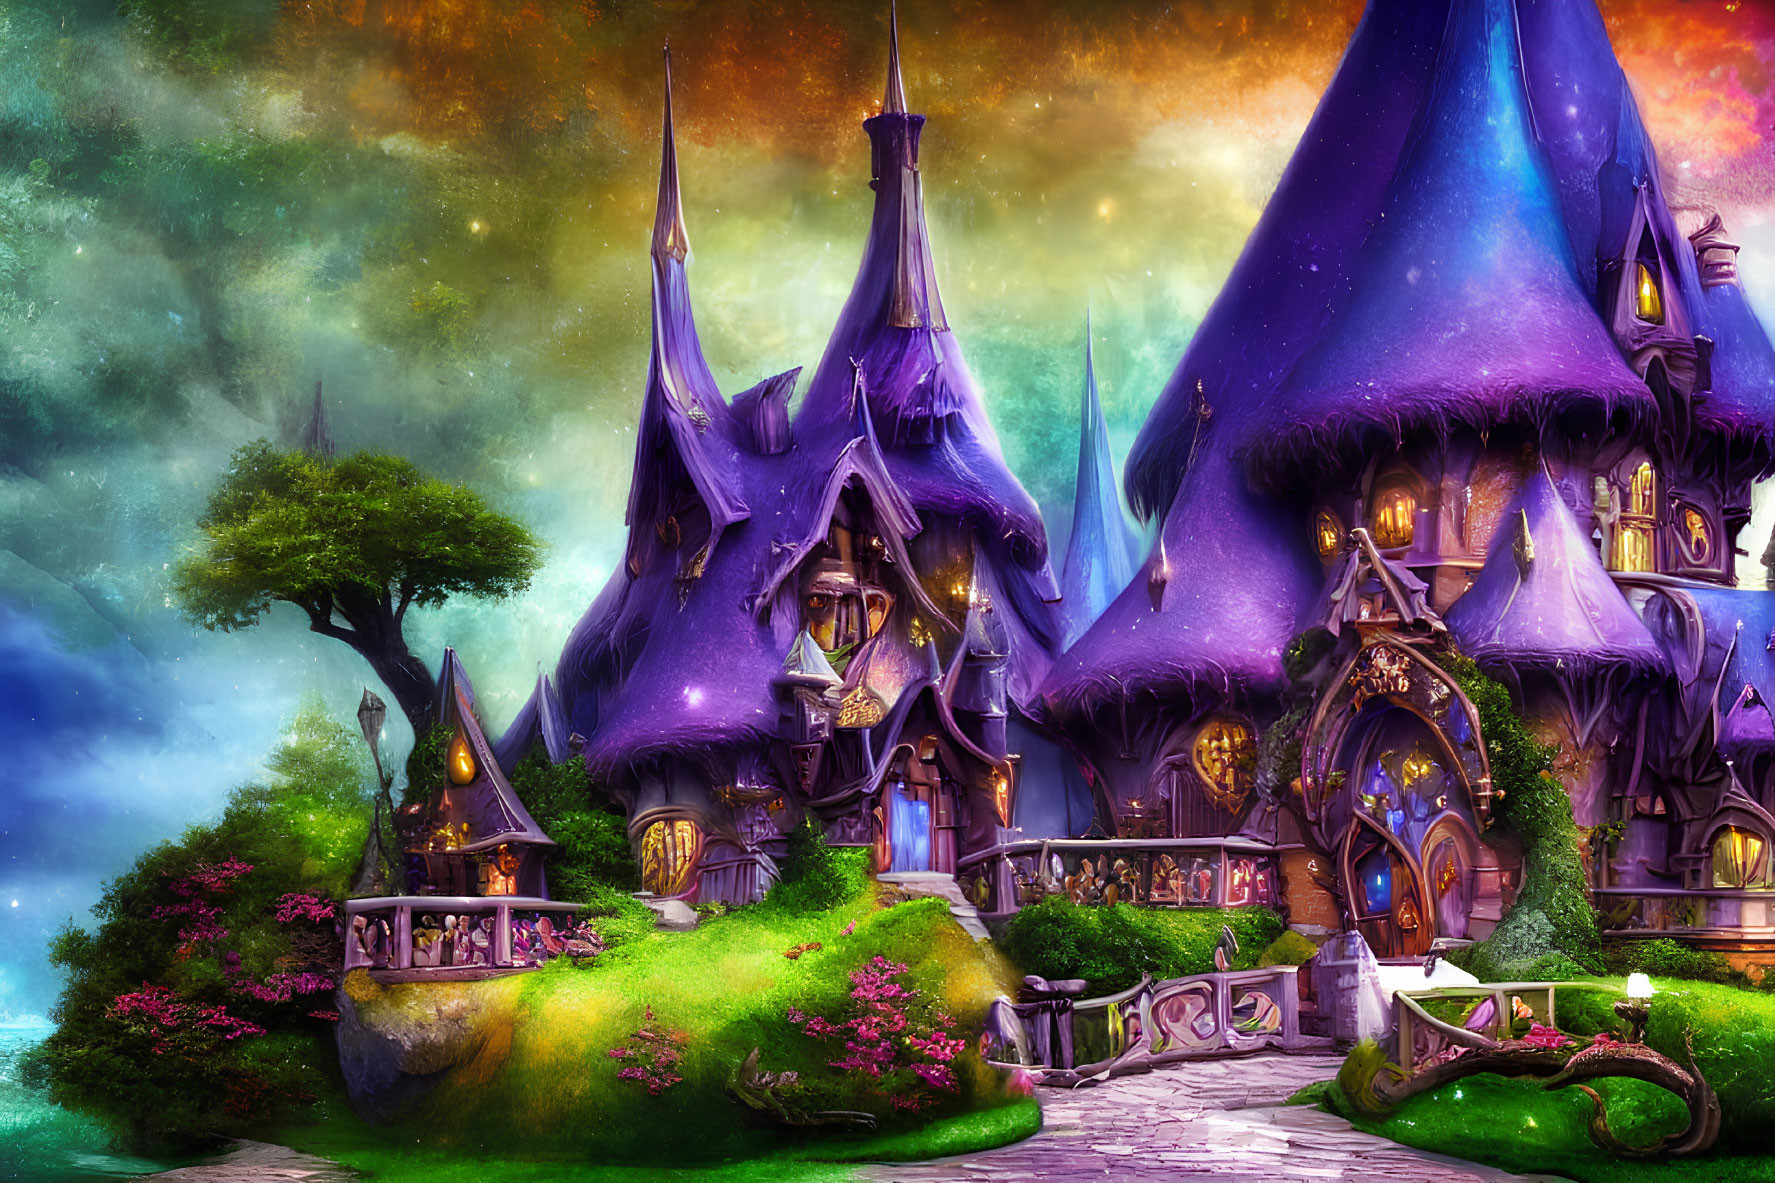 Vibrant Fantasy Landscape with Purple-Roofed Buildings